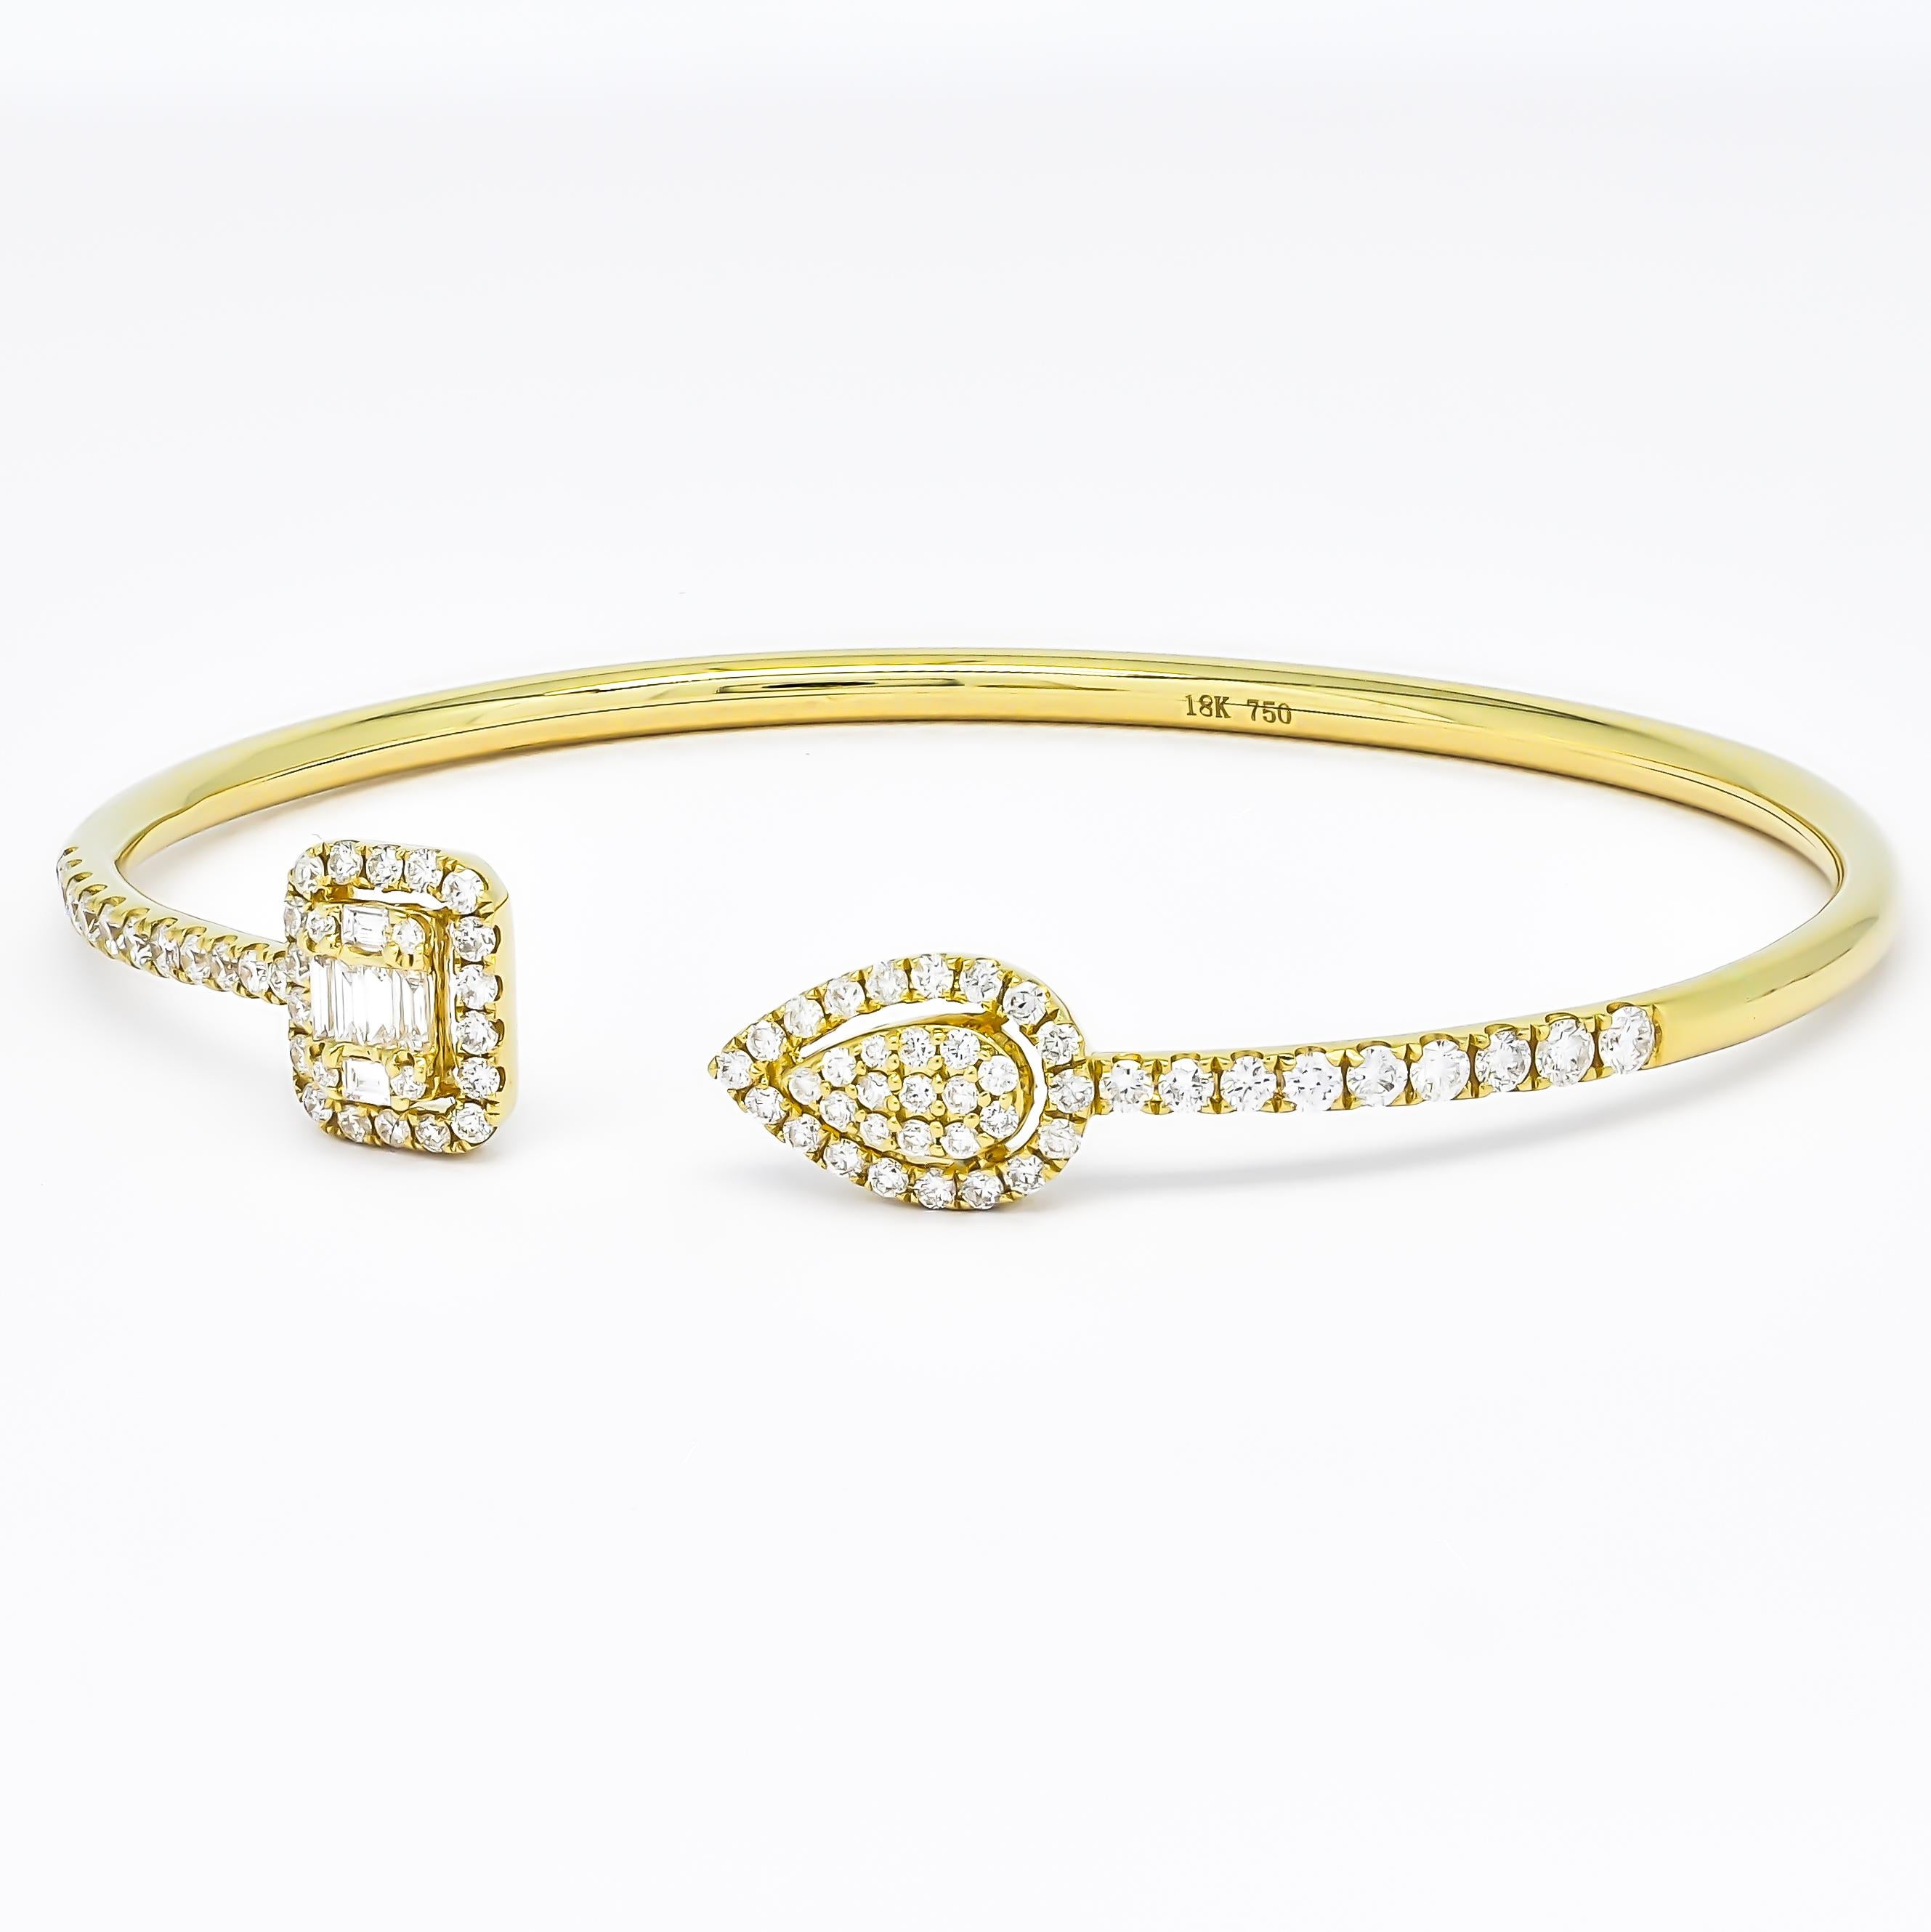 A masterful symphony of sophistication, this piece features a captivating blend of multi-shaped clusters, including Tapered Baguette and Round-shape diamonds, meticulously arranged to create a visual spectacle that goes beyond the ordinary.

Crafted